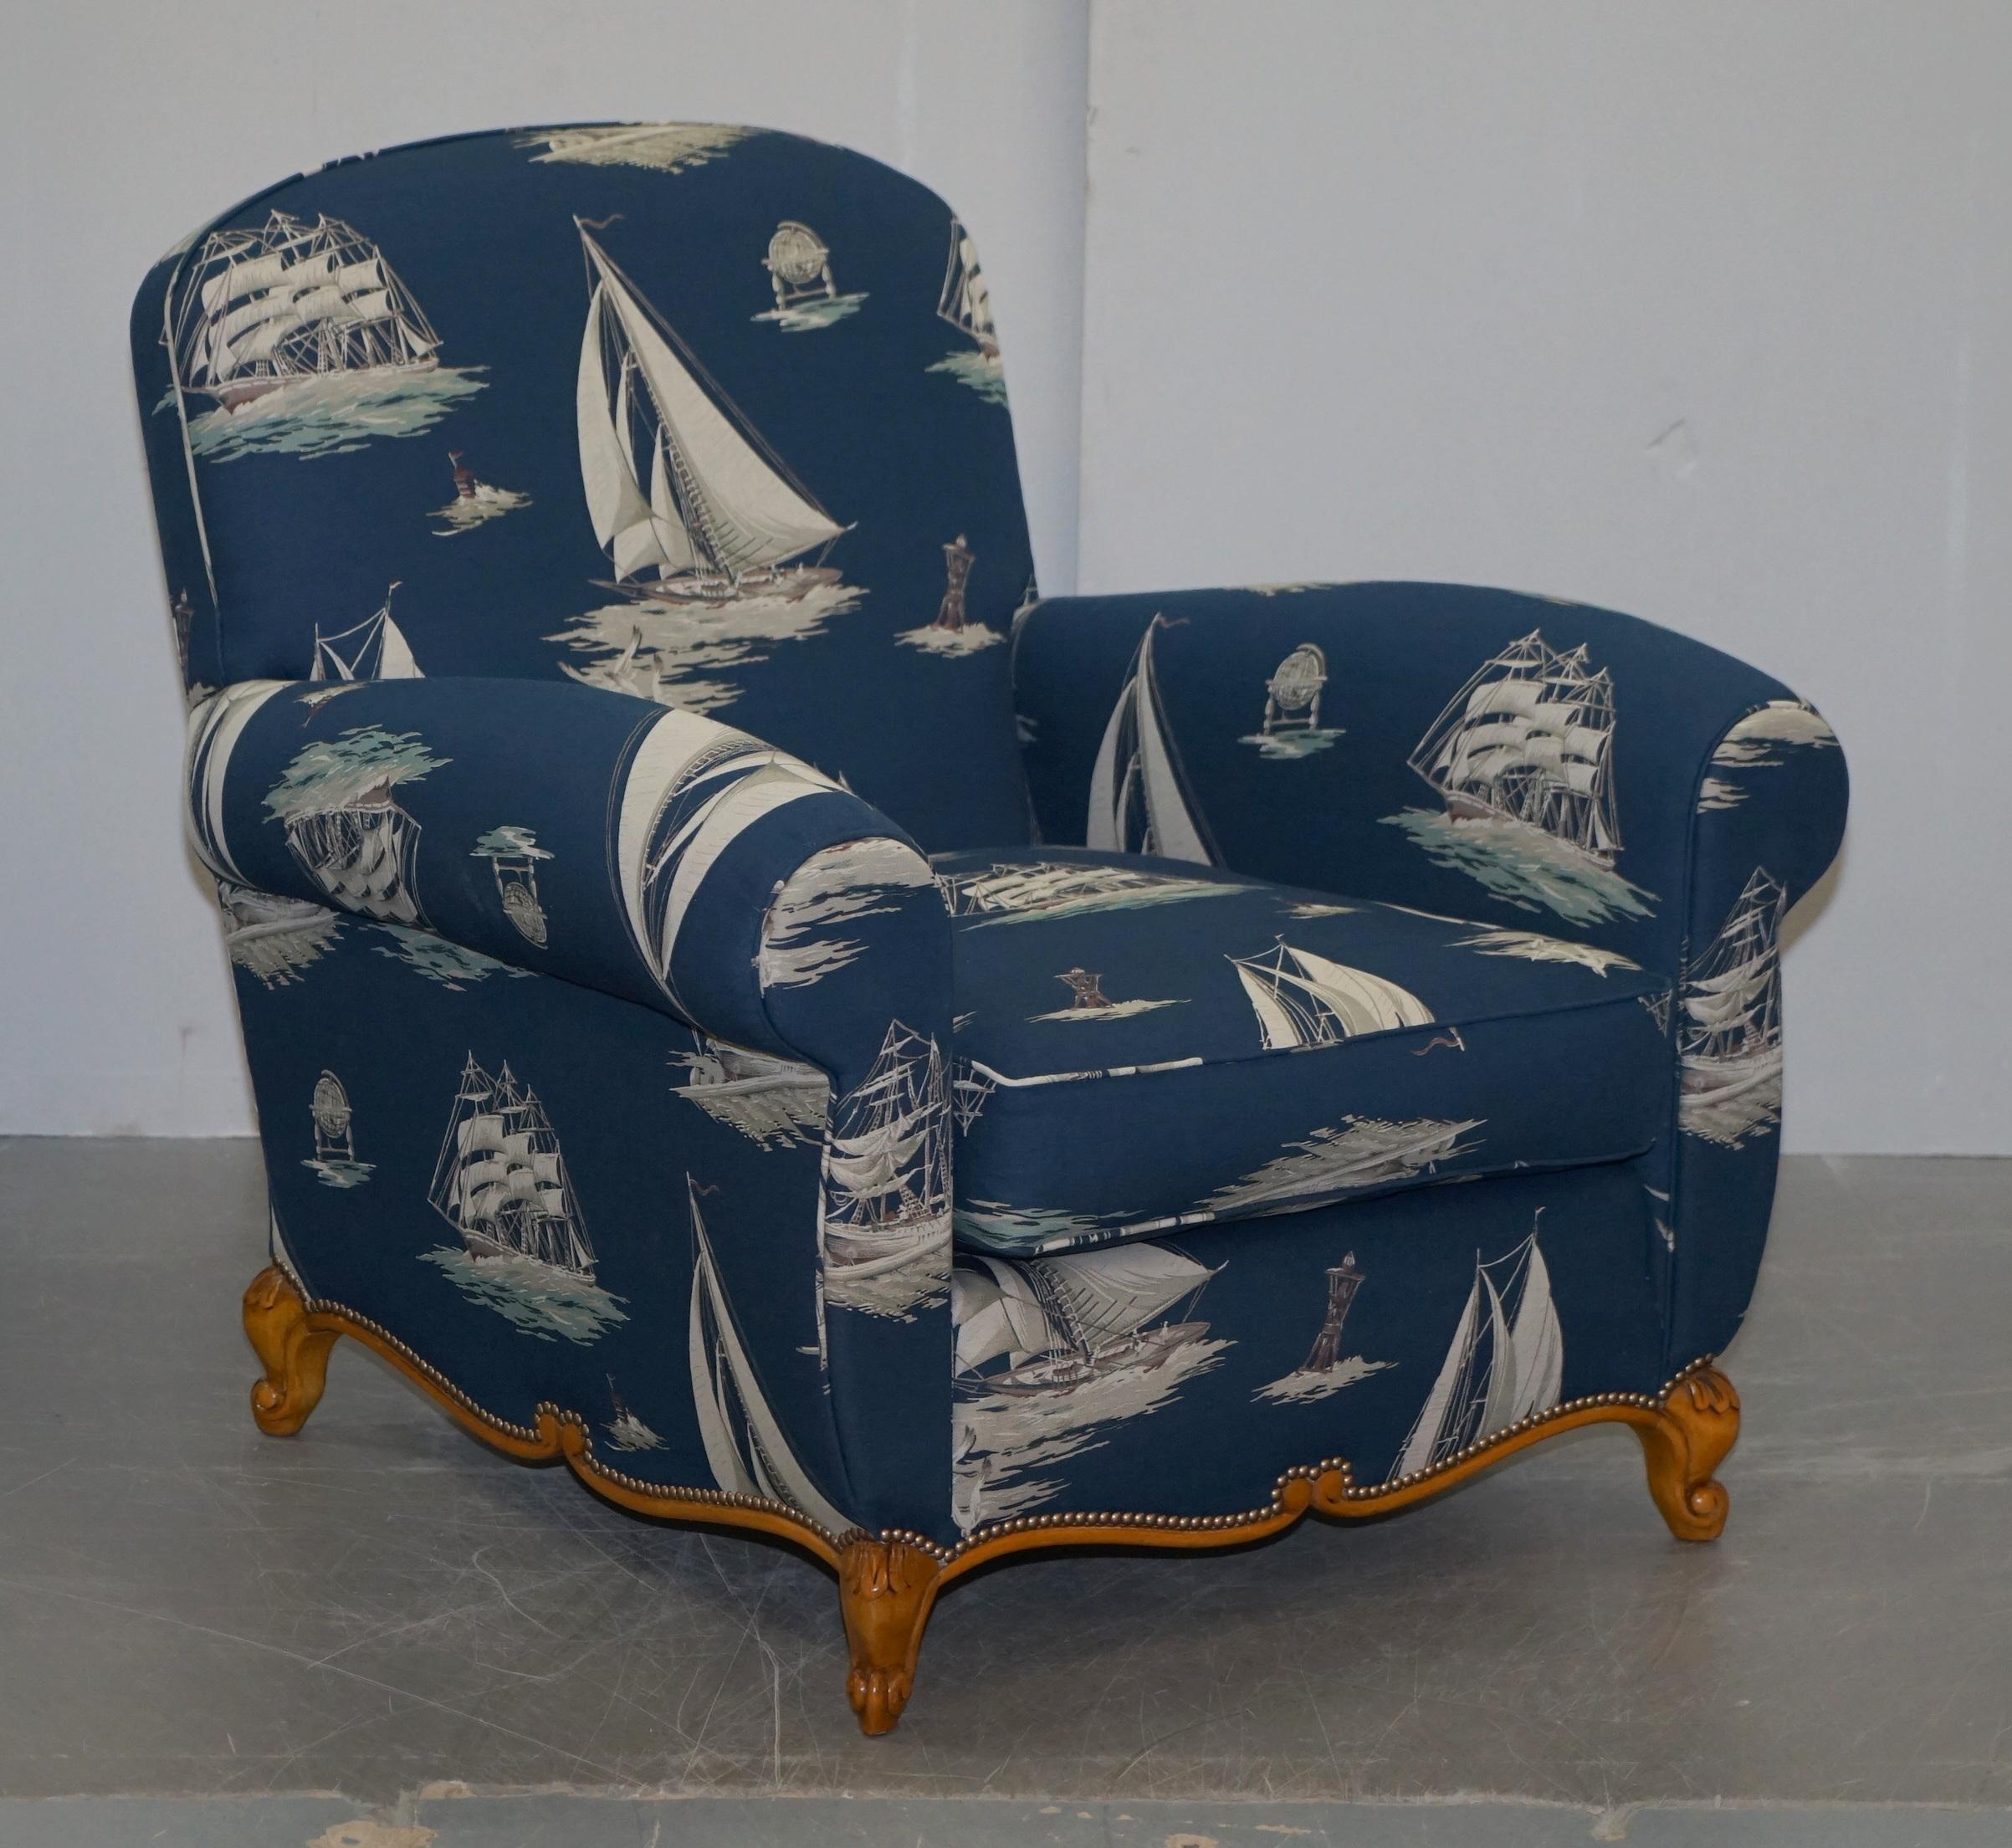 We are delighted to offer for sale this pair of custom made new Ralph Lauren French club armchairs upholstered in Ralph Lauren “Down Easter Boats” nautical upholstery RRP £18,000 GBP.

These are a custom made to order pair, they were purchased as